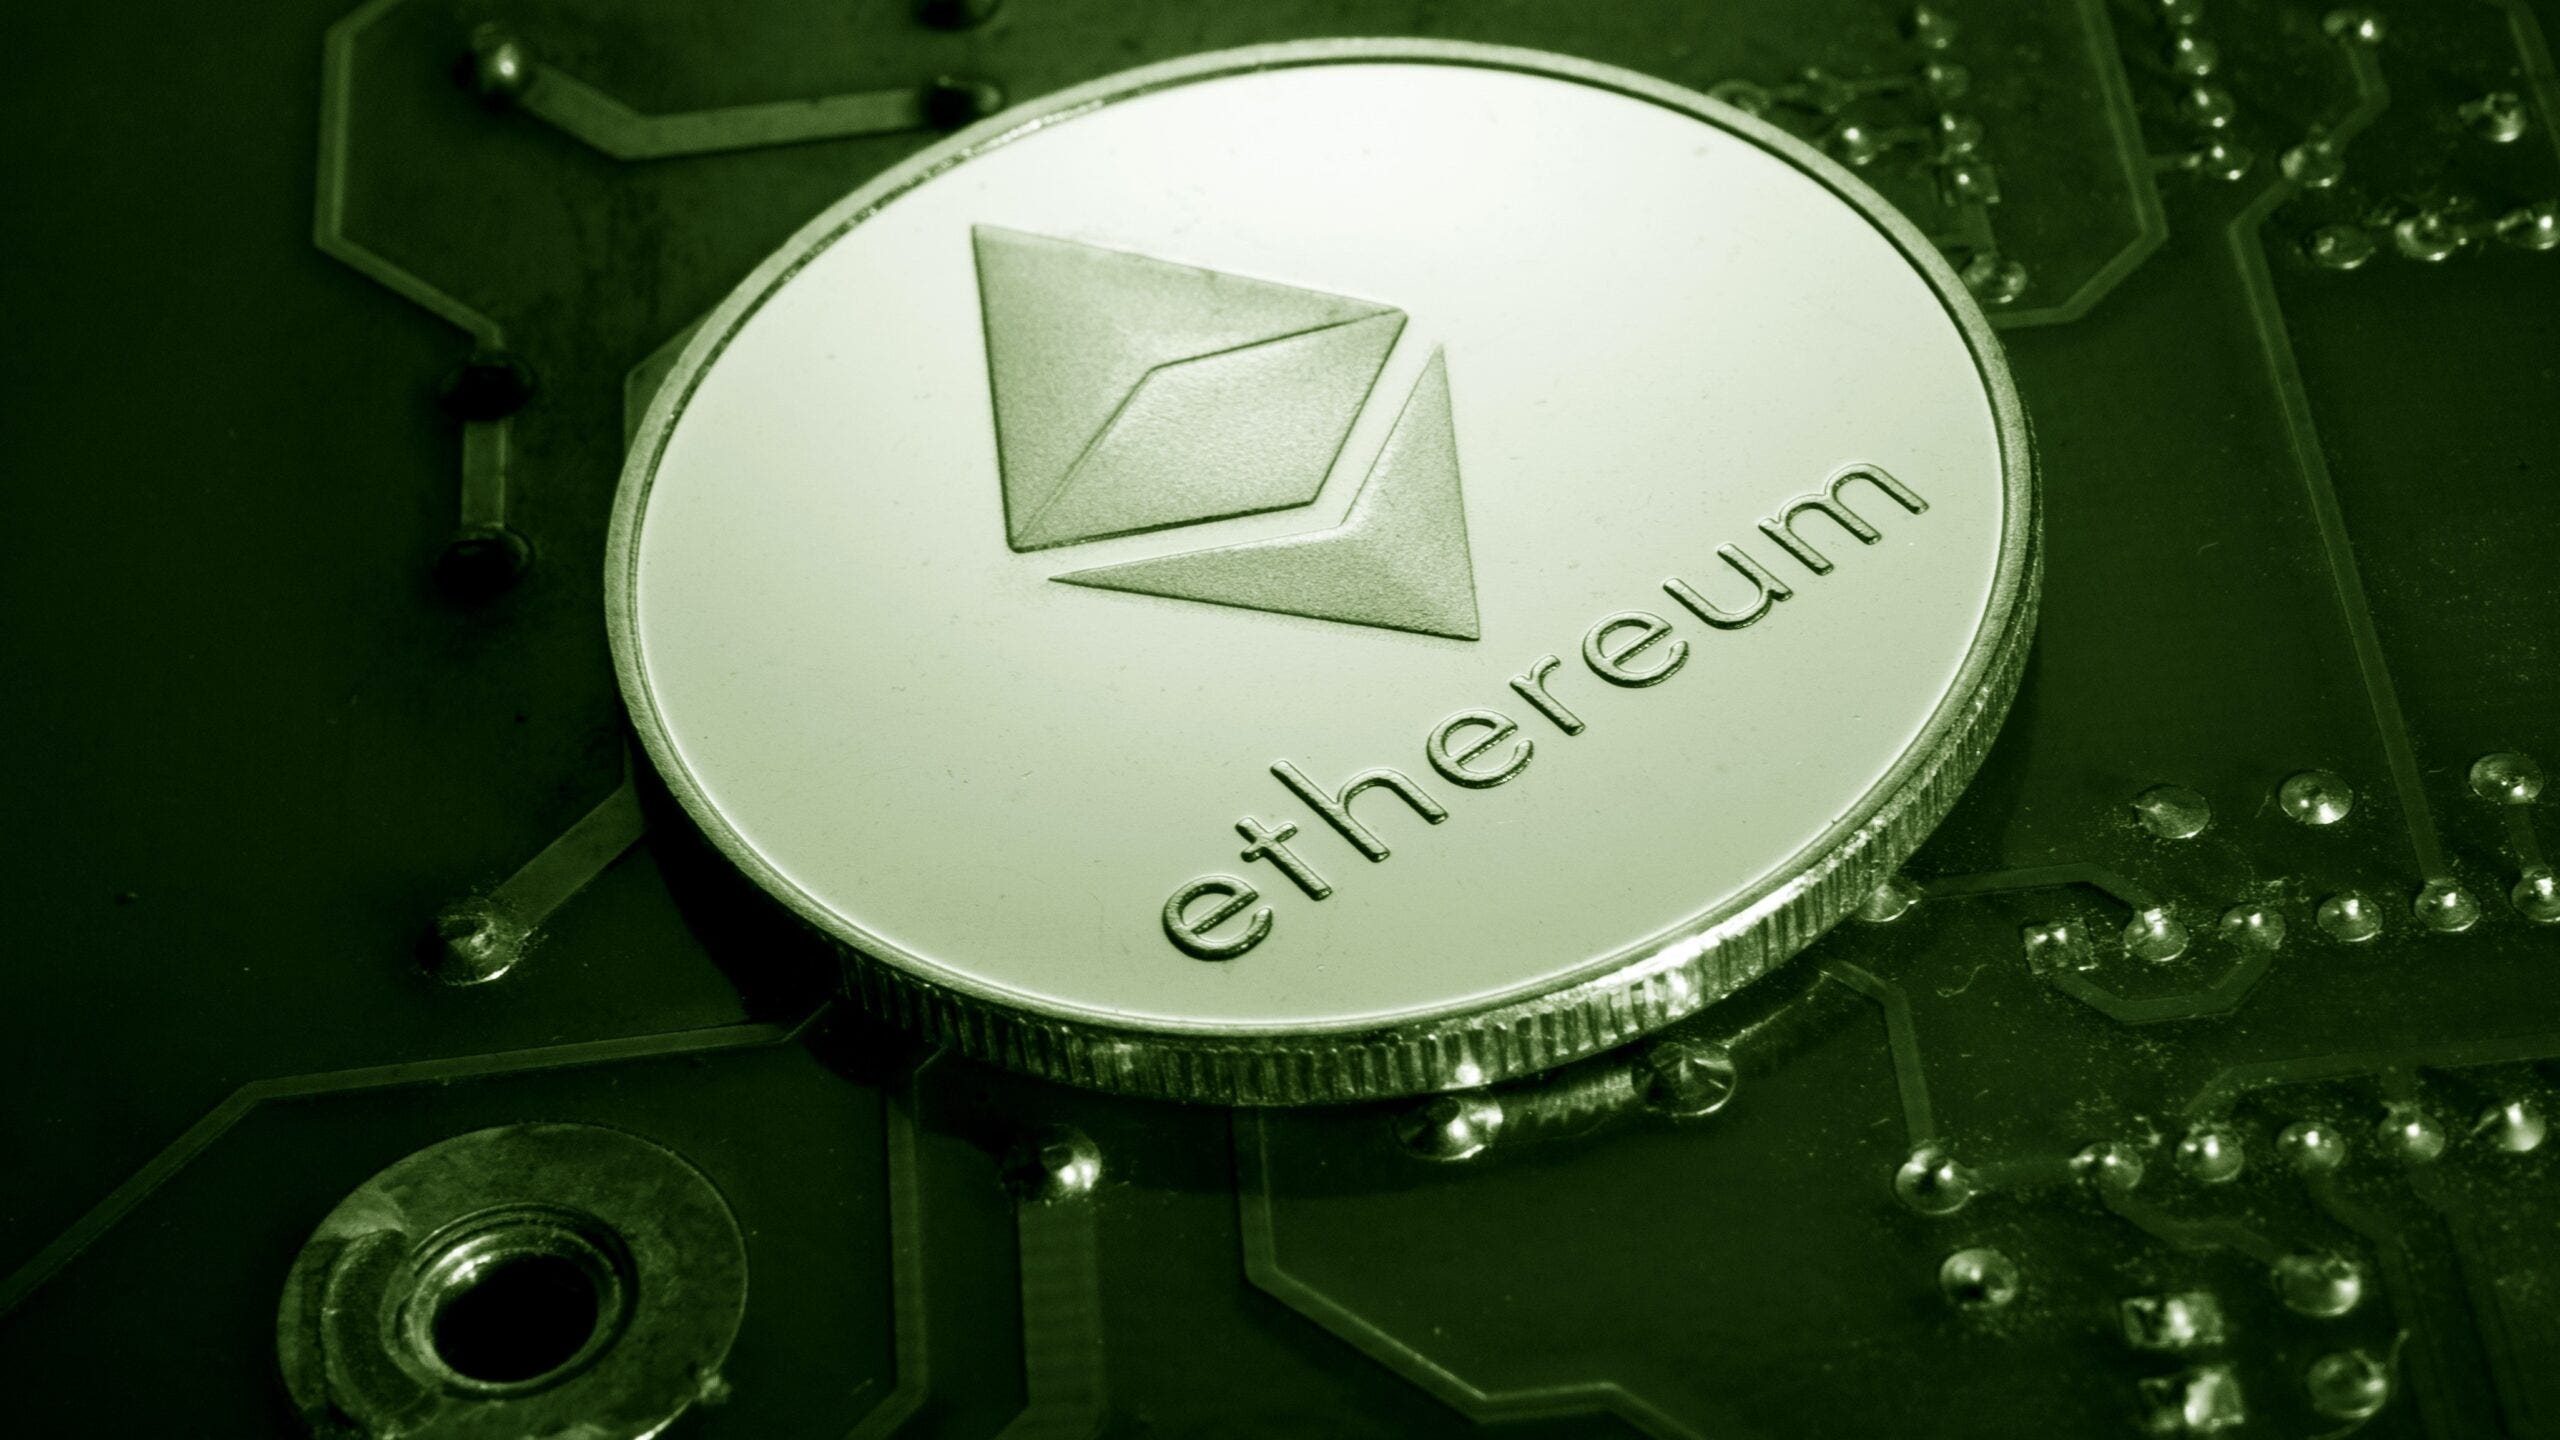 Ethereum Price Predictions for Comprehensive Insights with MEXC Research